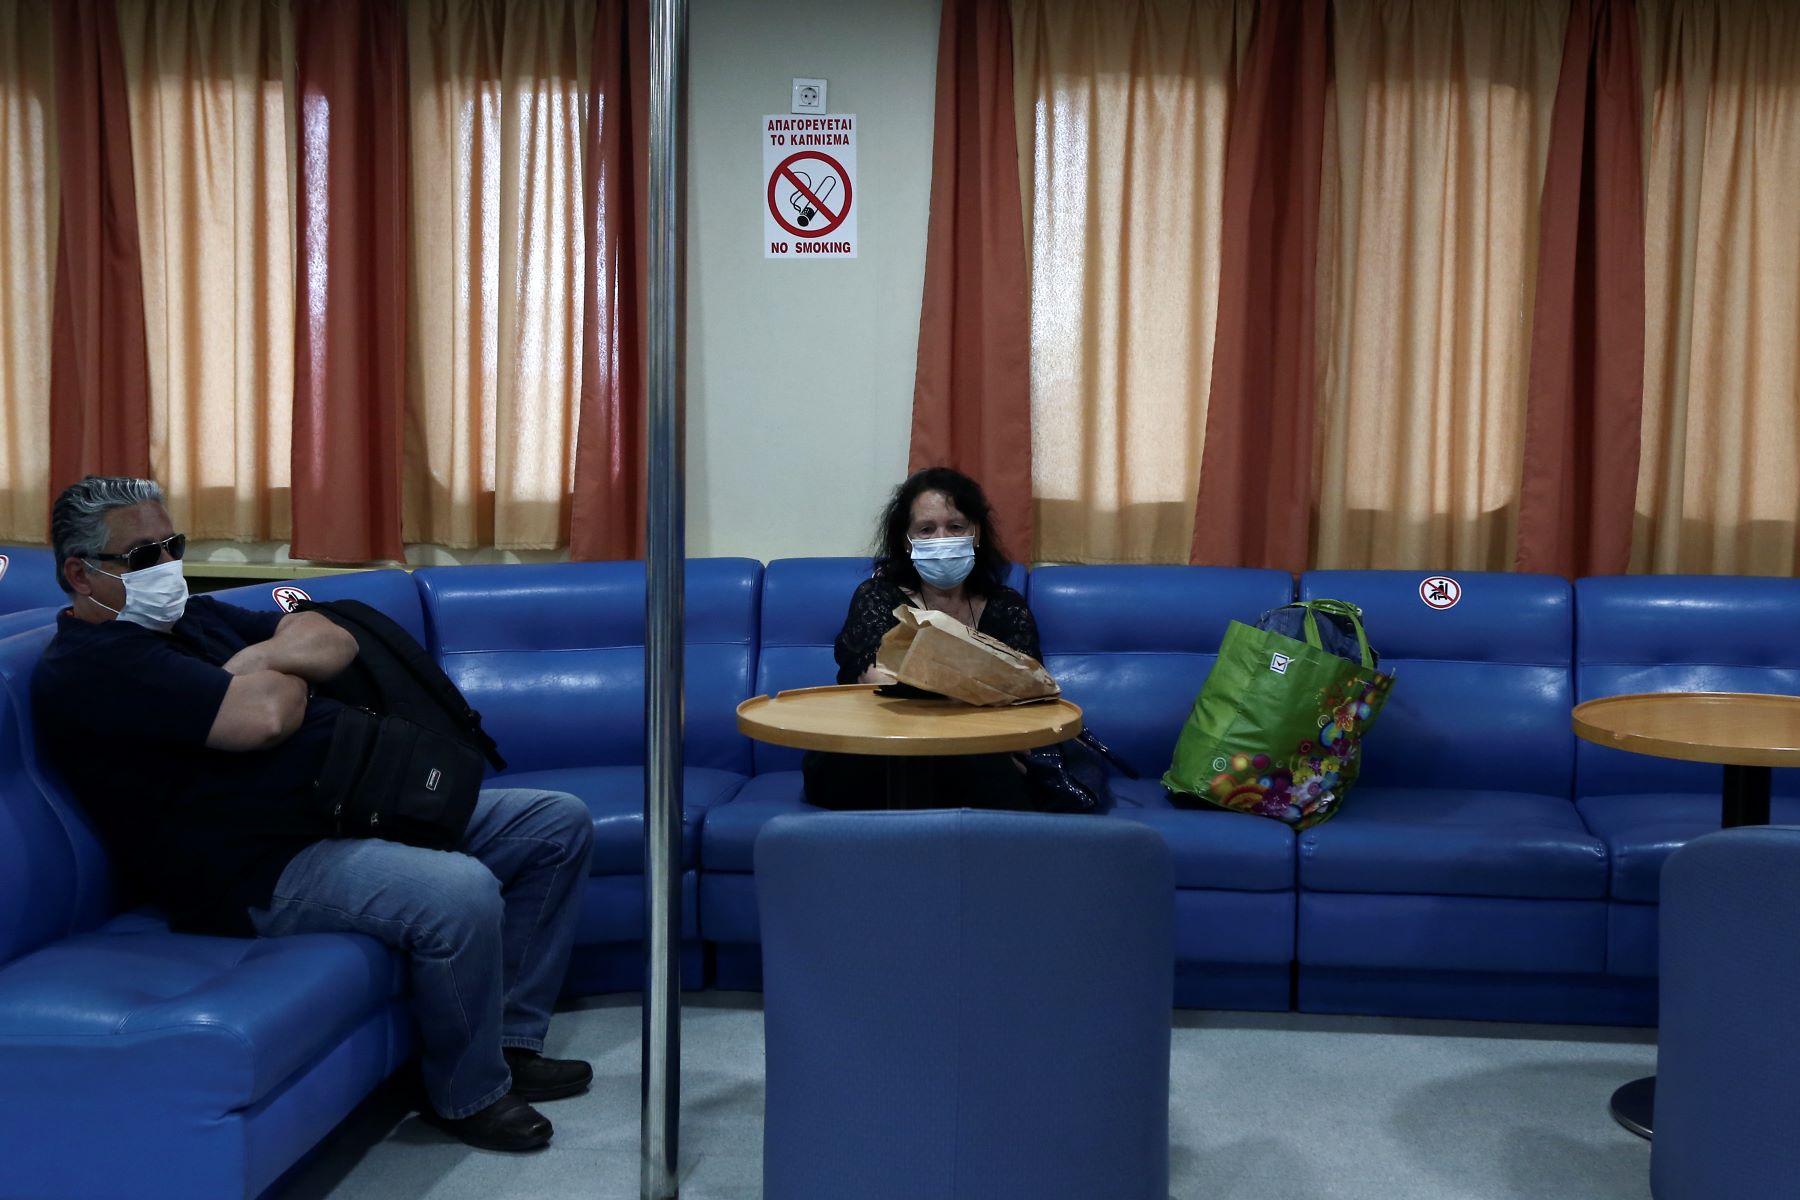 Passengers on boat seats on a trip to the Cyclades islands in Greece wearing masks, preventative measure of mold